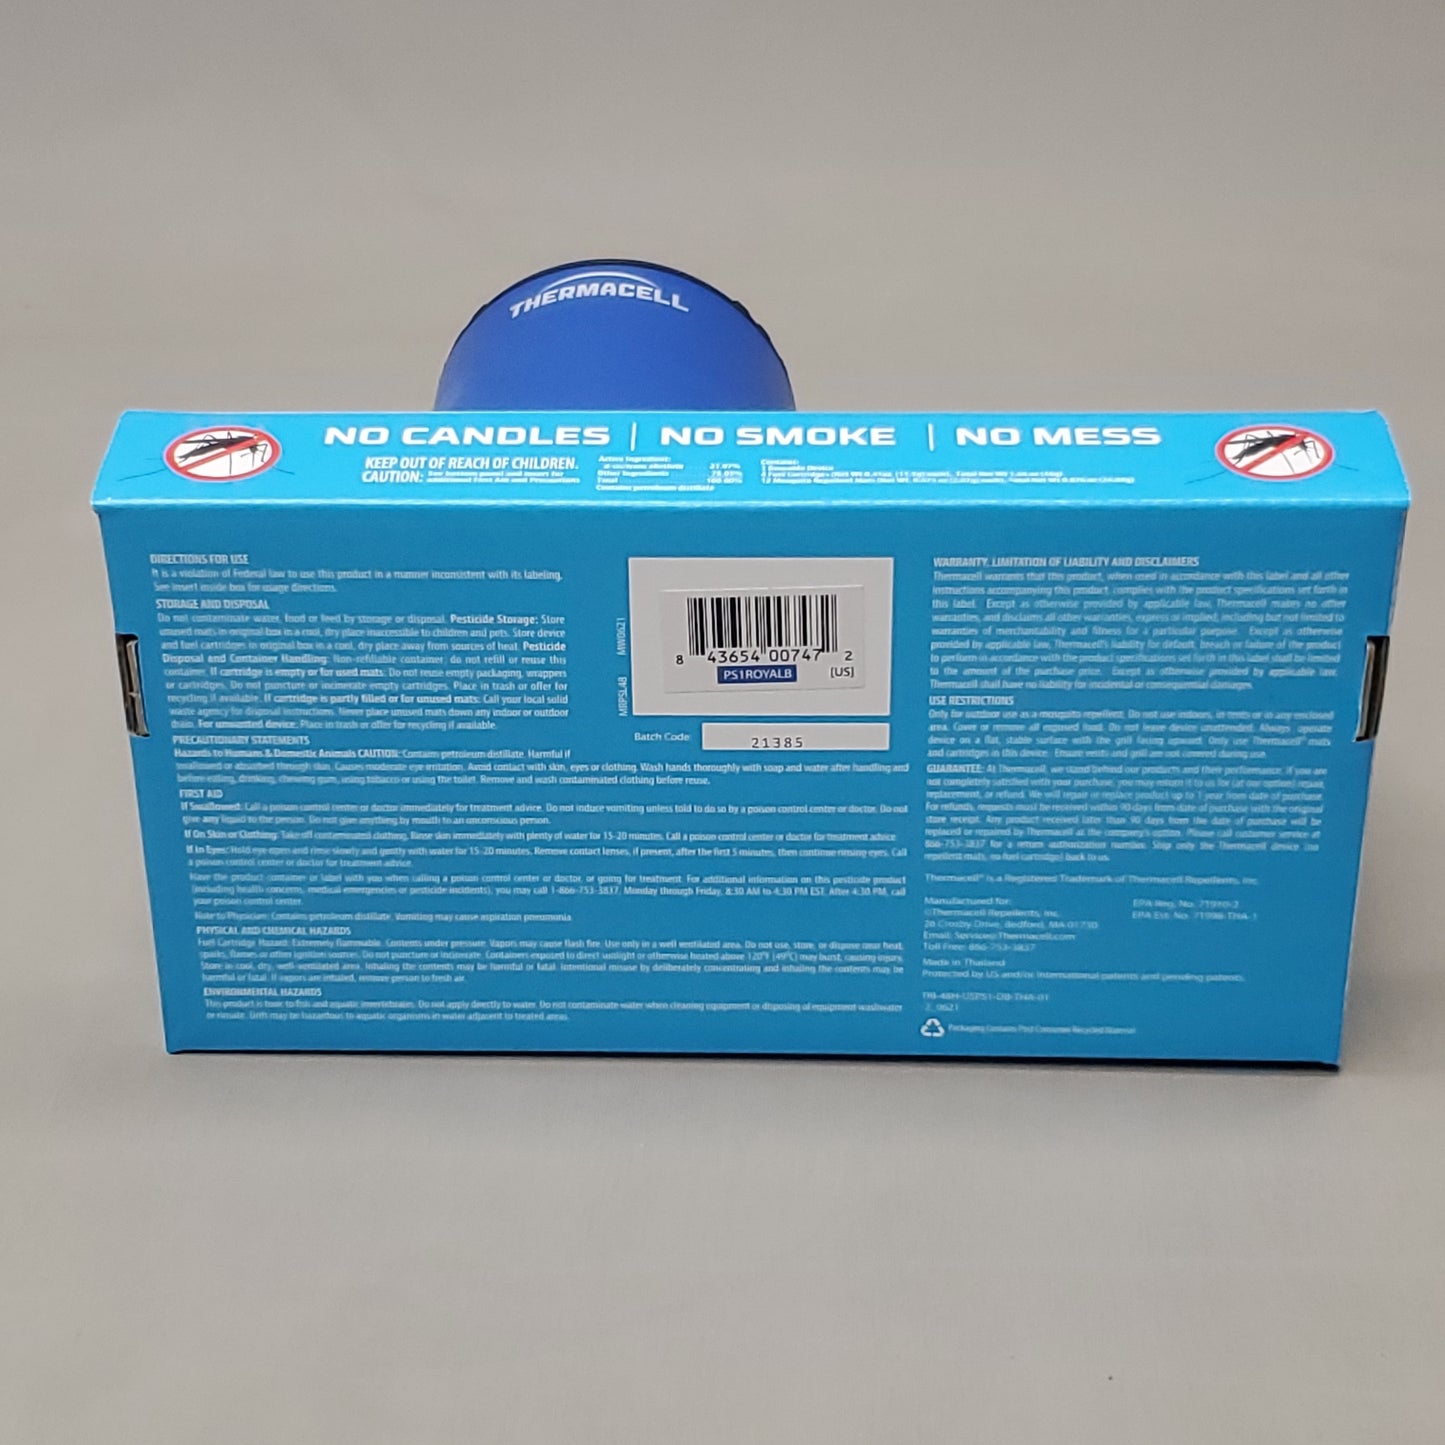 THERMACELL Patio Shield Mosquito Repellent 15' Zone Royal Blue PS1ROYALB (New)